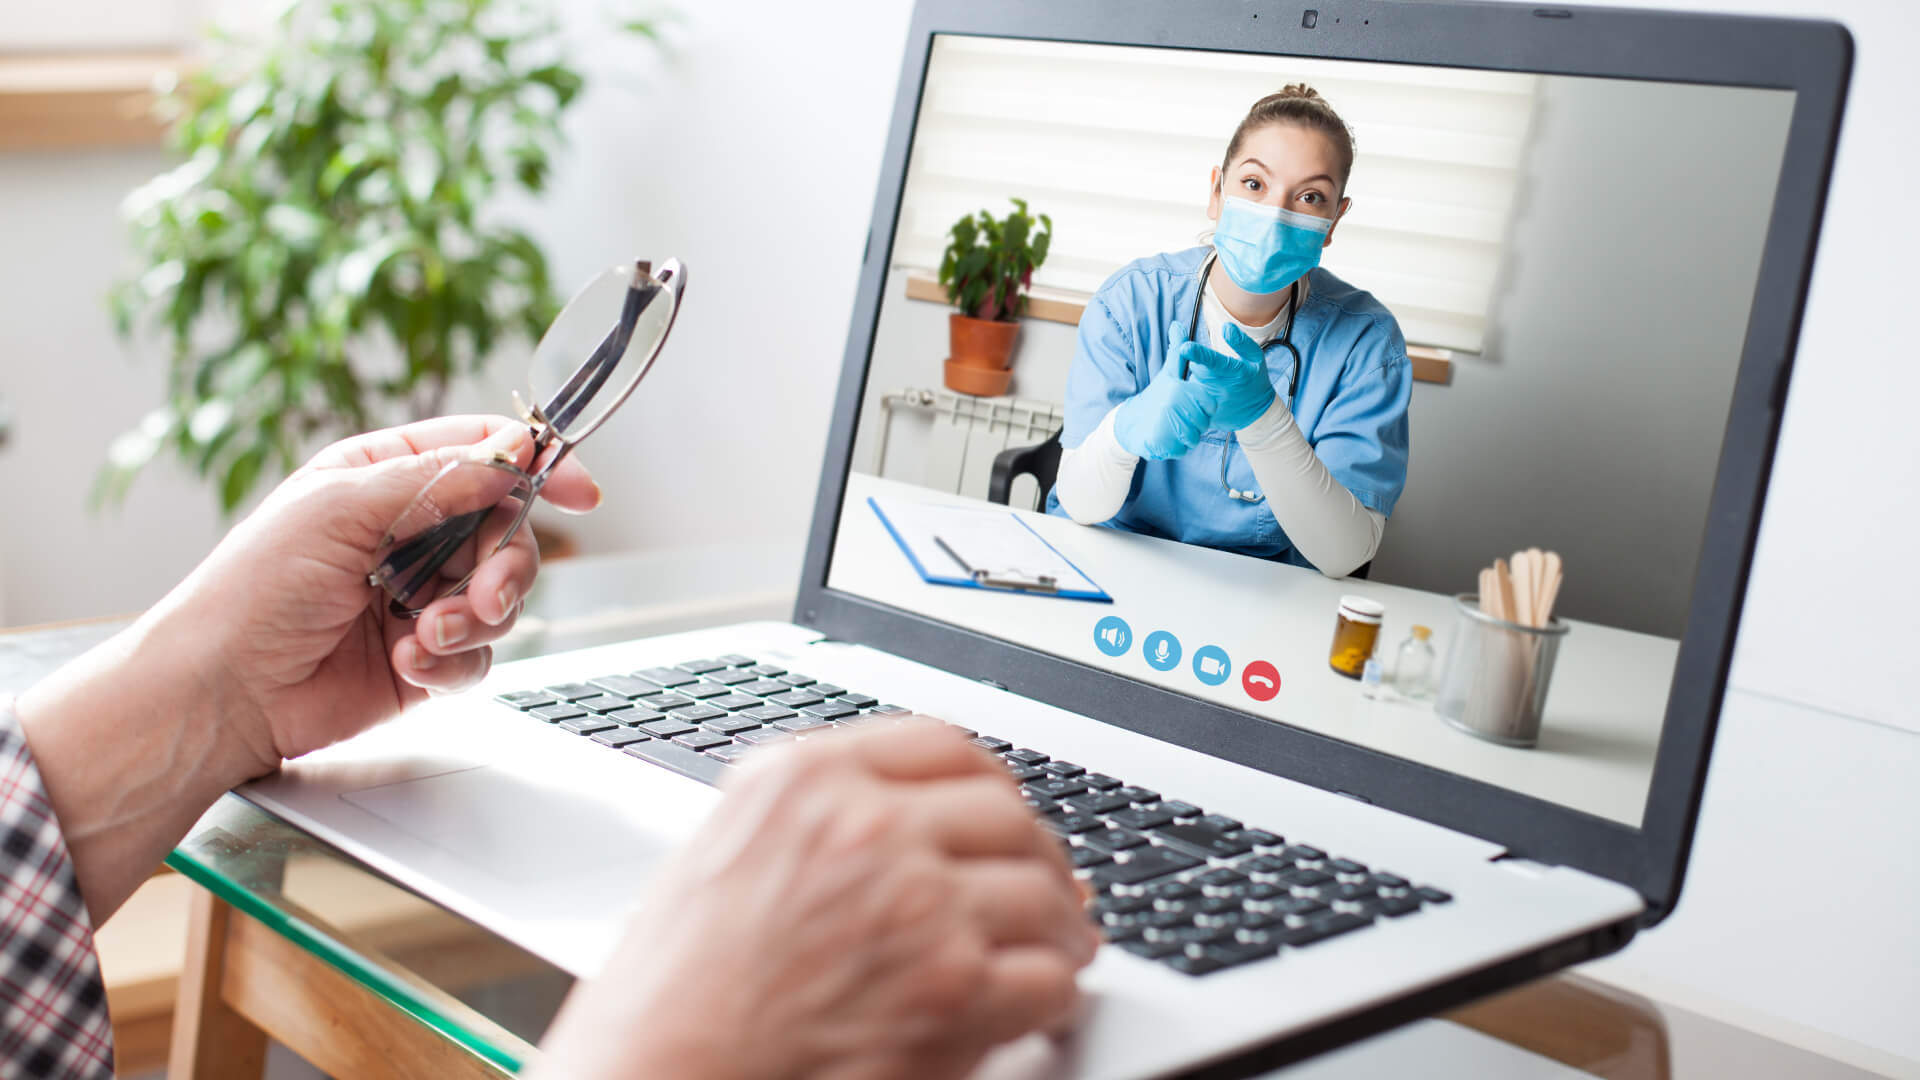 Person having a video call with a medical professional, who is giving instructions or advice, as indicated by her gestures.